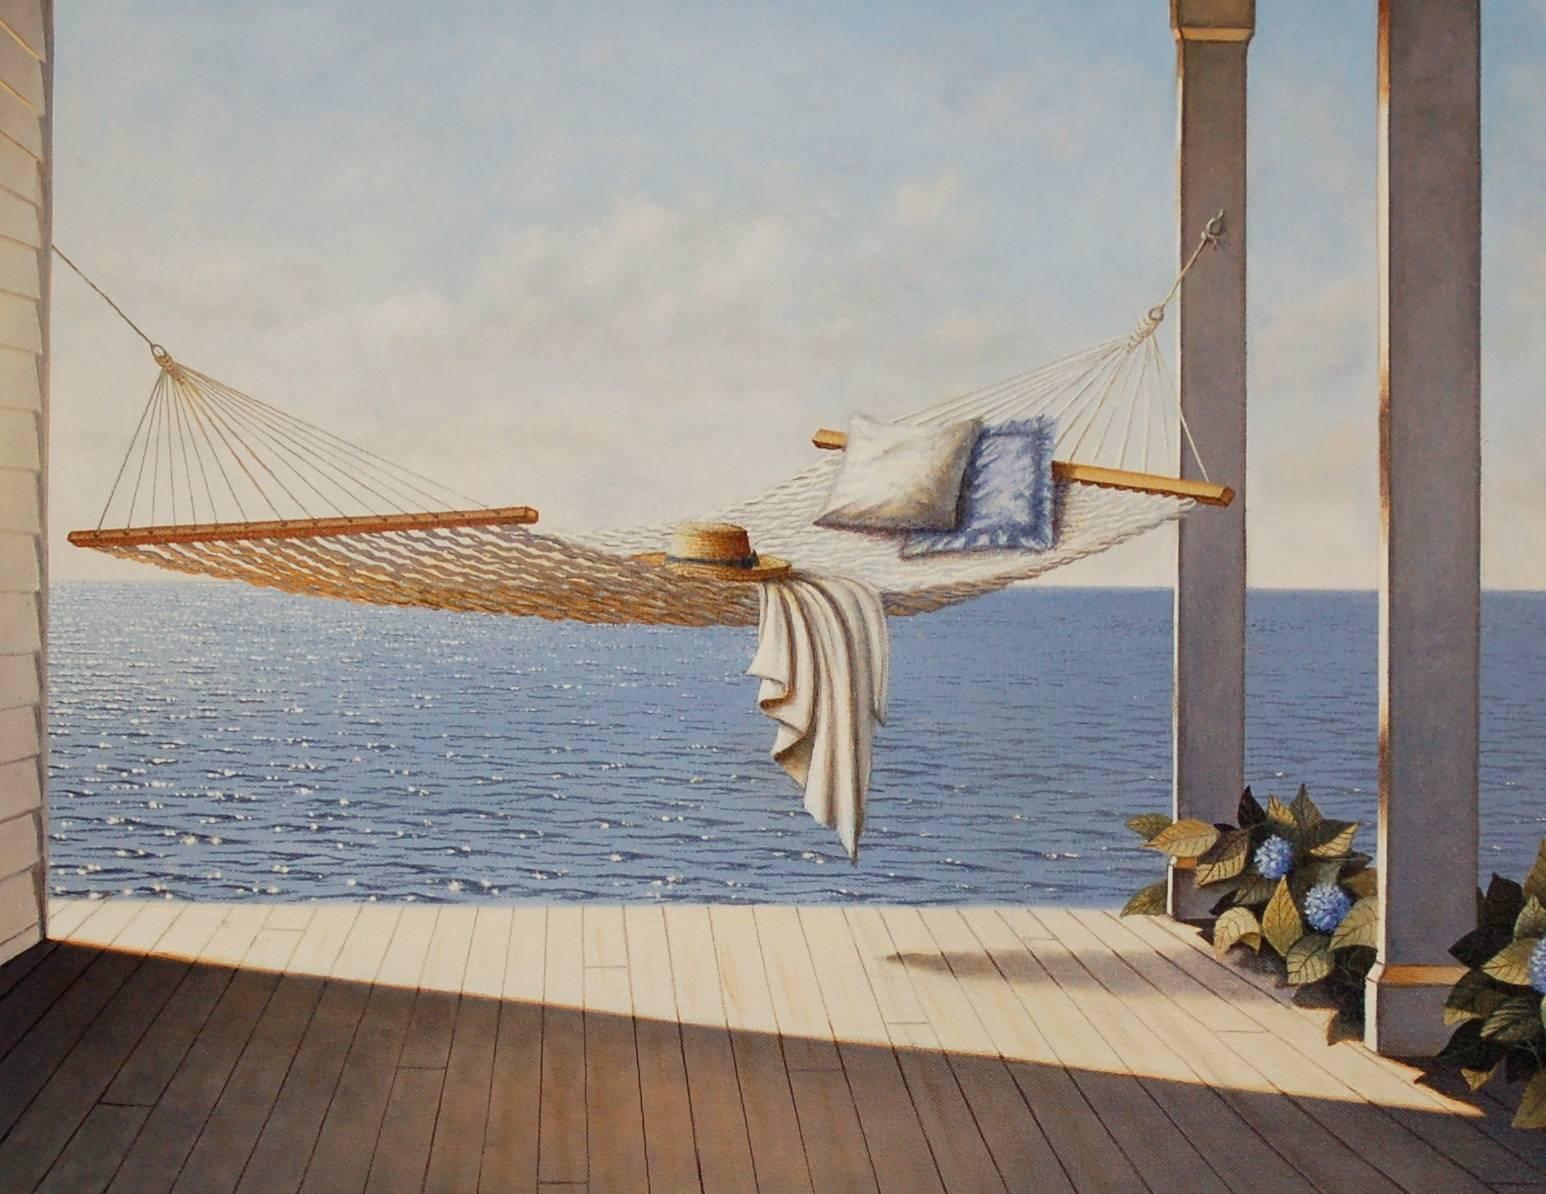 My Escape - American Realist Painting by Daniel Pollera